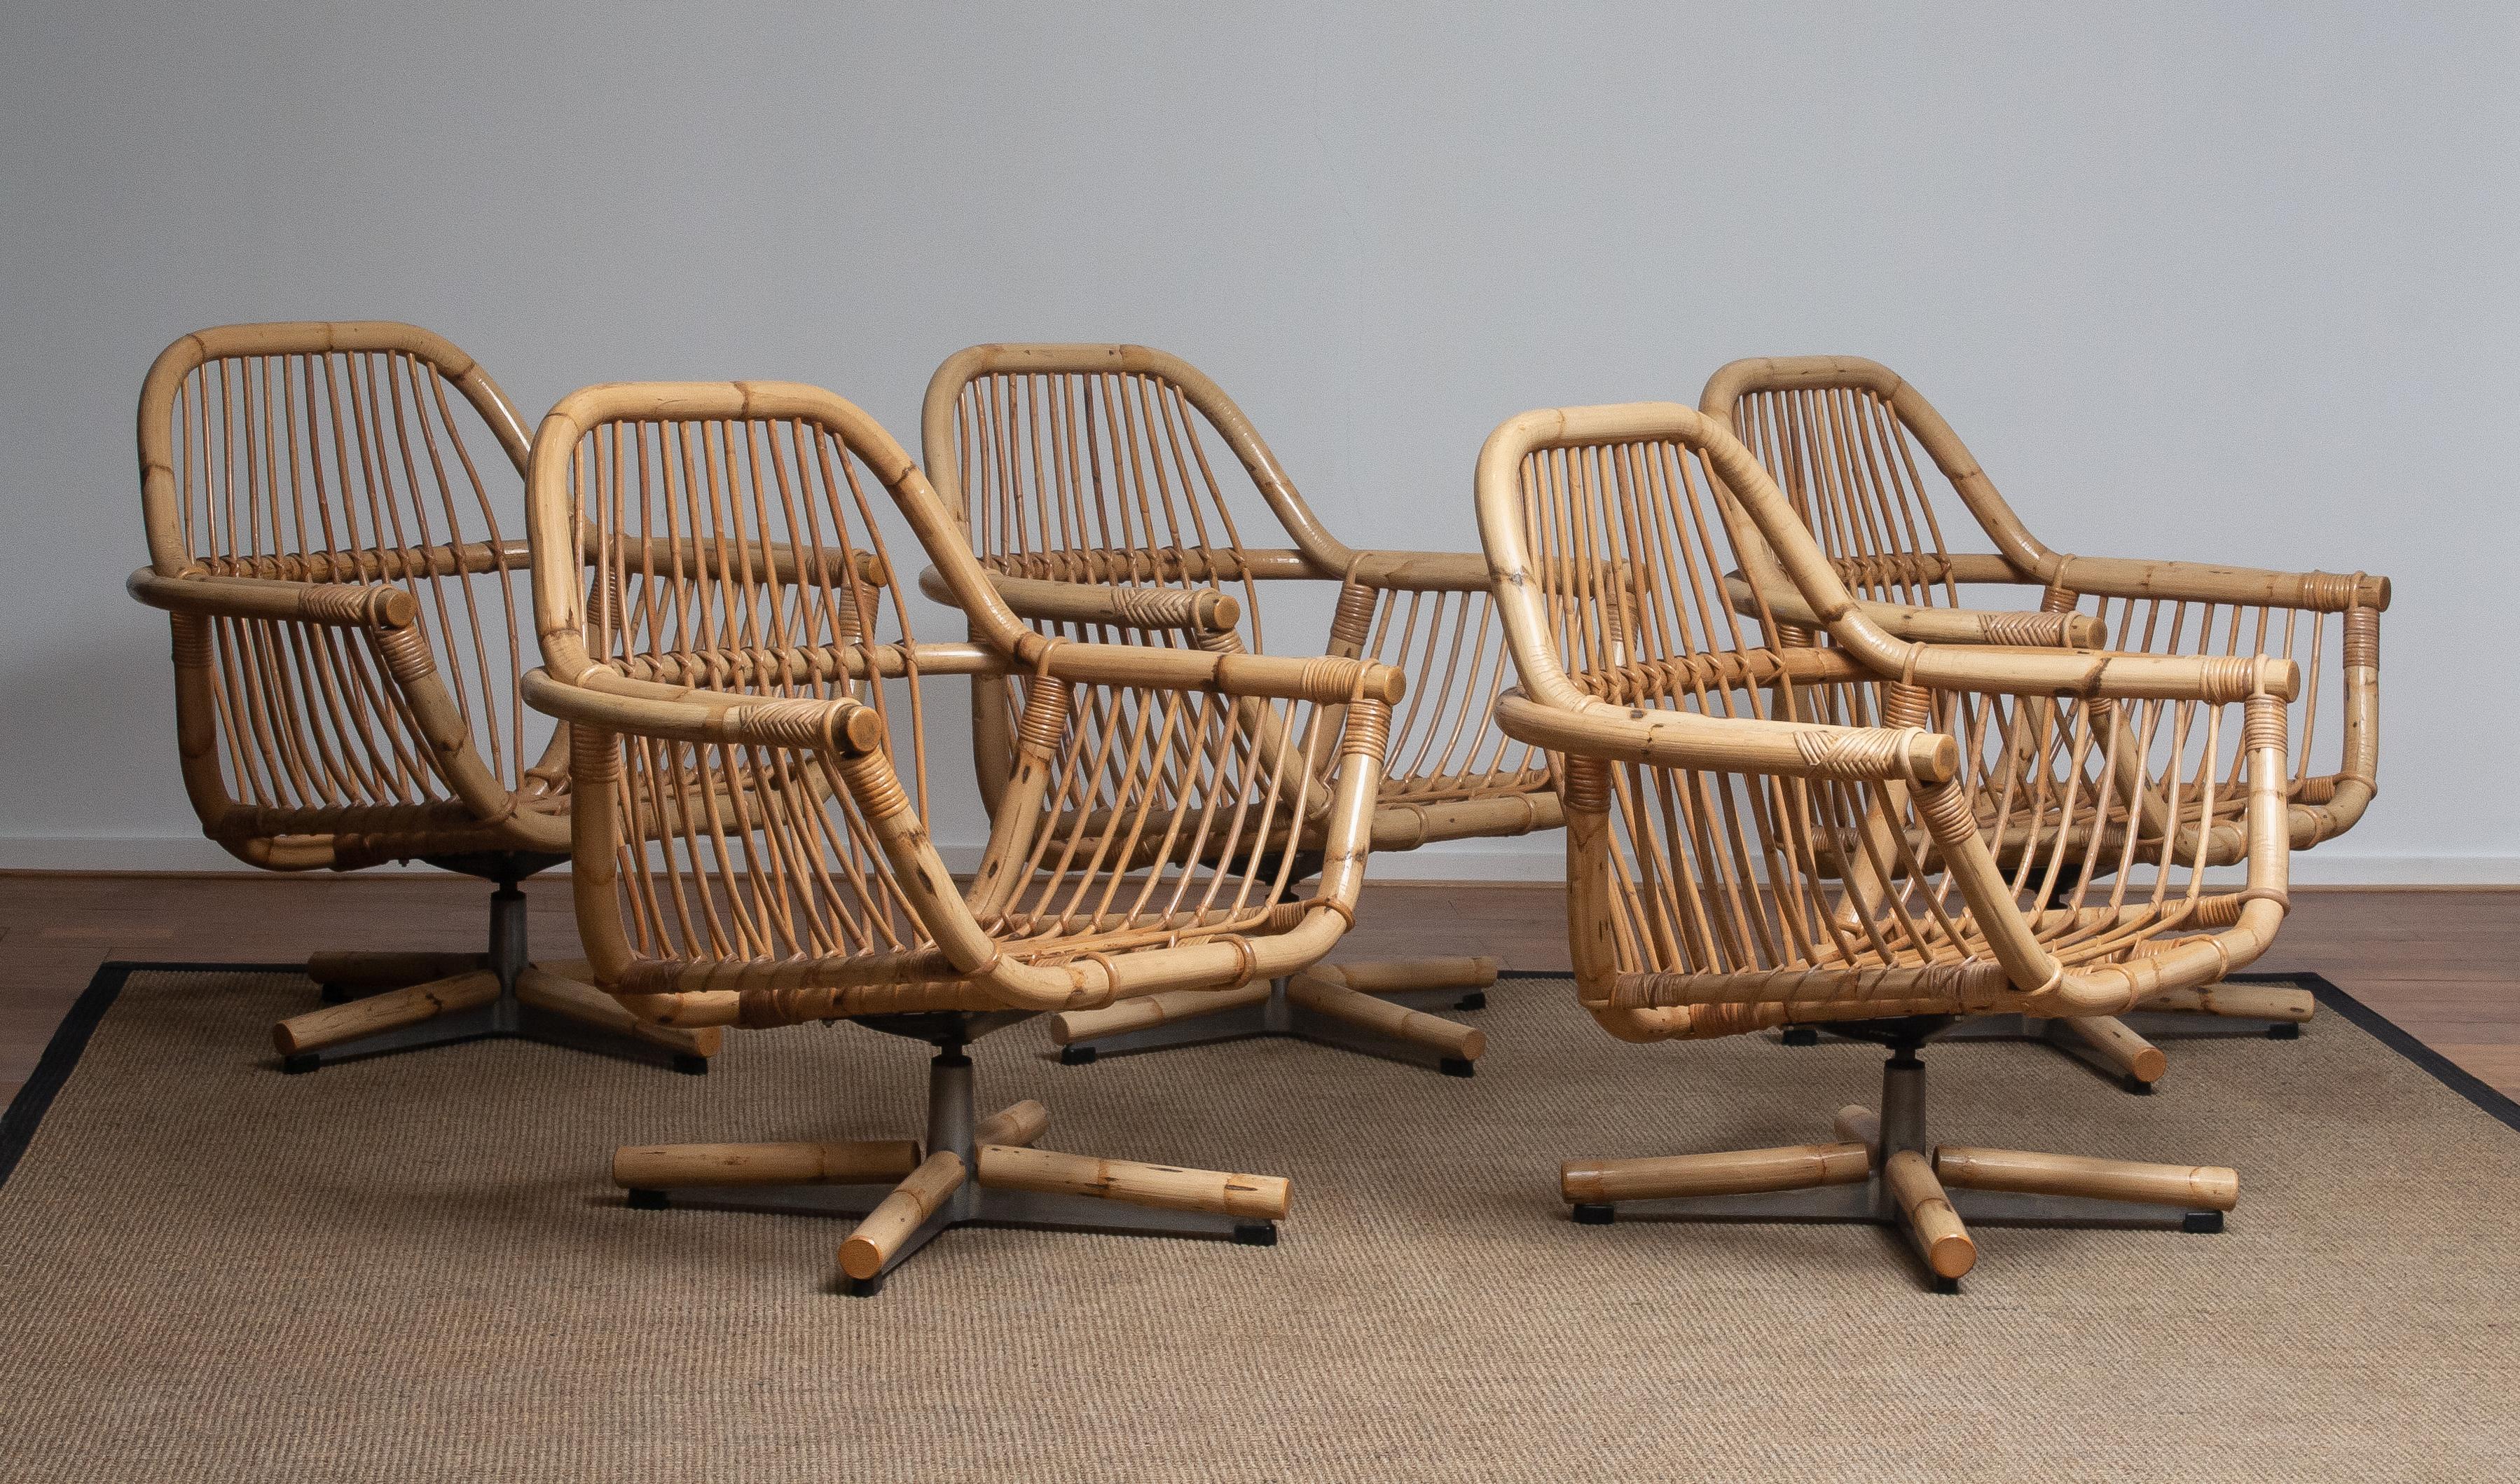 1960s Rattan Garden Set / Lounge Set Consist Five Swivel Chairs and Coffee Table 2